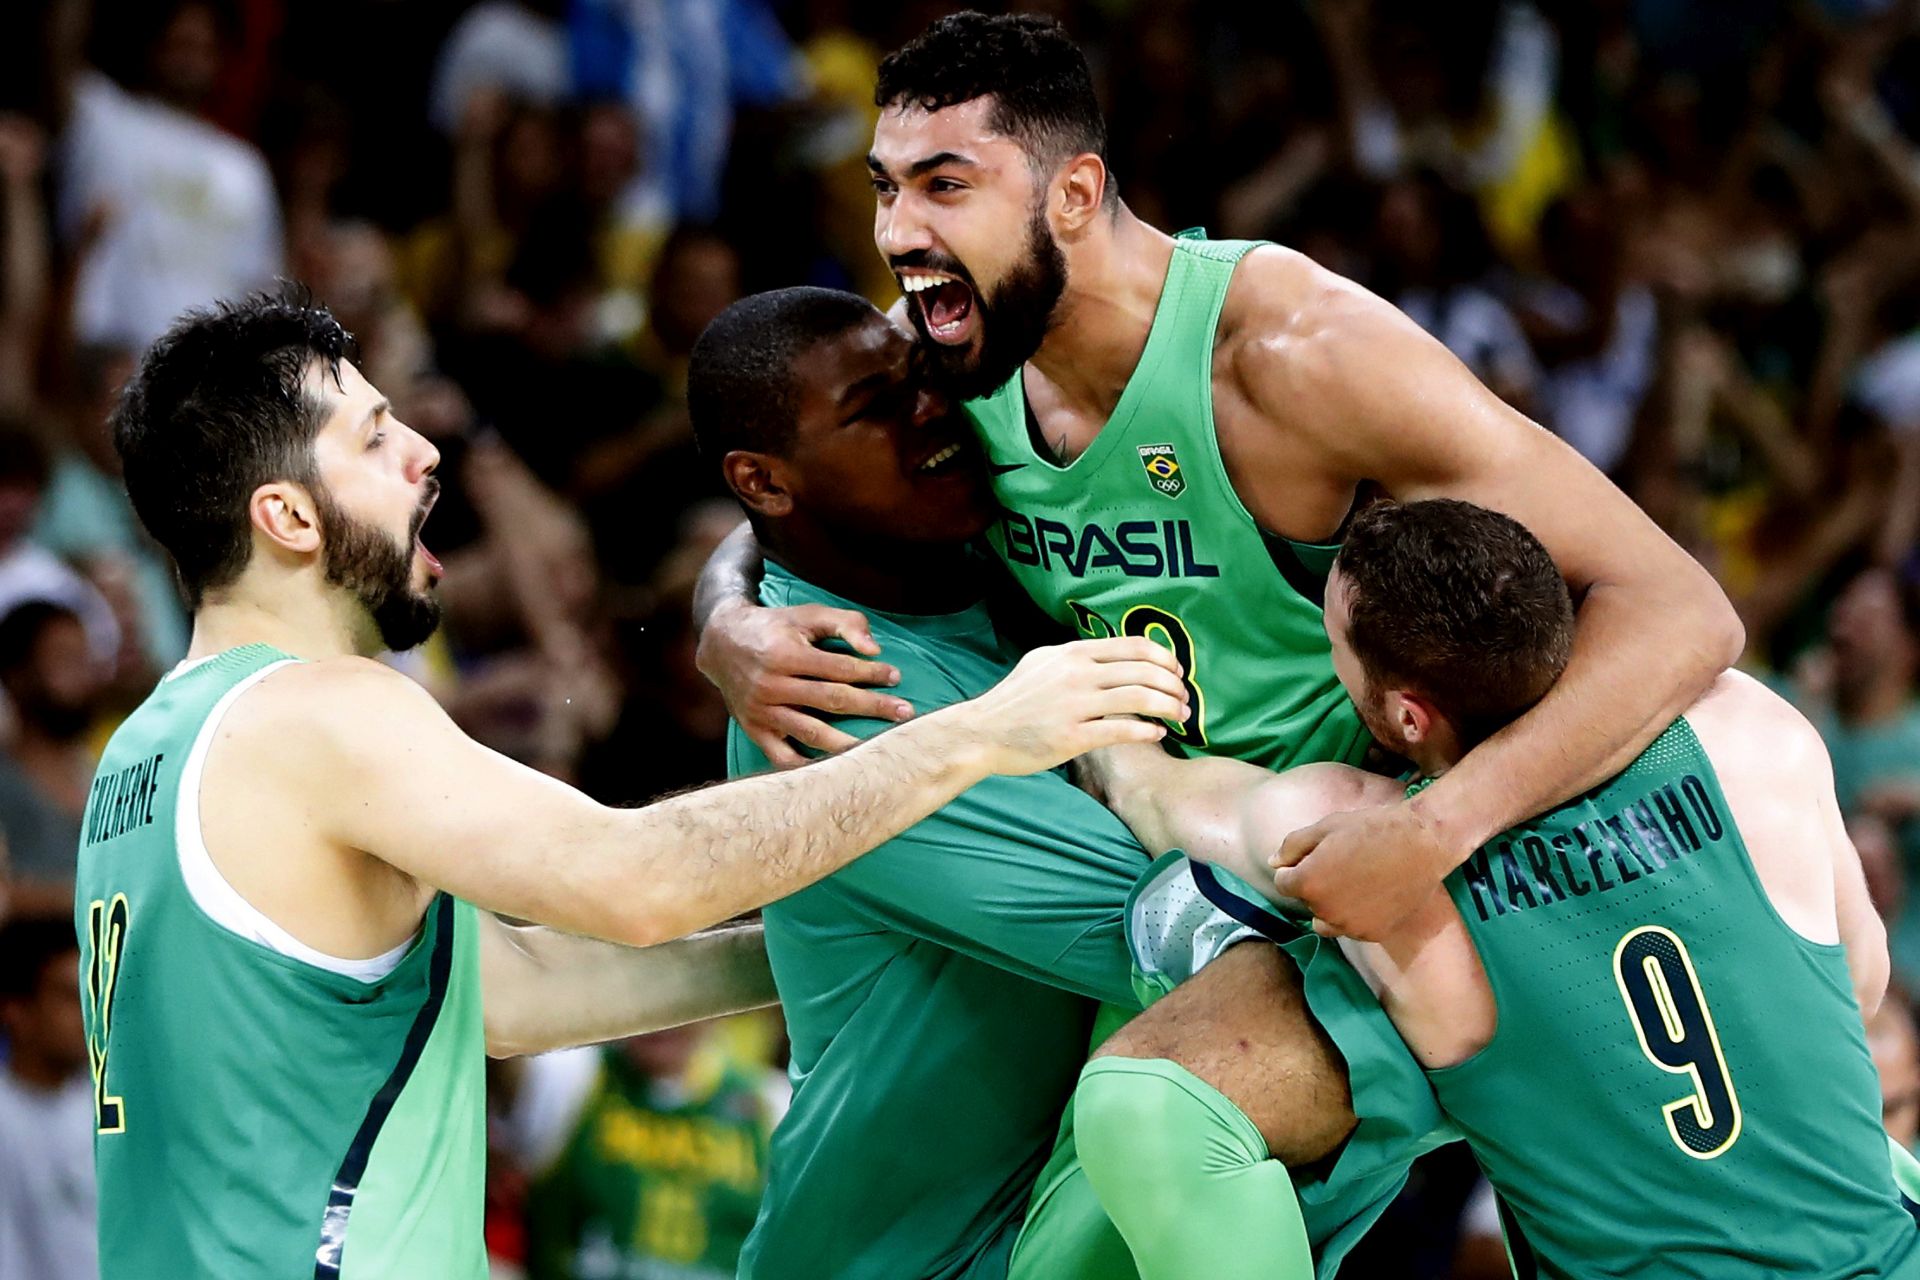 epa05468553 Brazil's Lima Augusto (2R) Marcelinho Huertas (R), Guilherme Giovannoni (L) and Felicio Cristiano (2L) celebrate as they play Spain during the men's basketball game of the Rio 2016 Olympic Games at the Carioca Arena 1 in the Olympic Park in Rio de Janeiro, Brazil, 09 August 2016.  EPA/JORGE ZAPATA